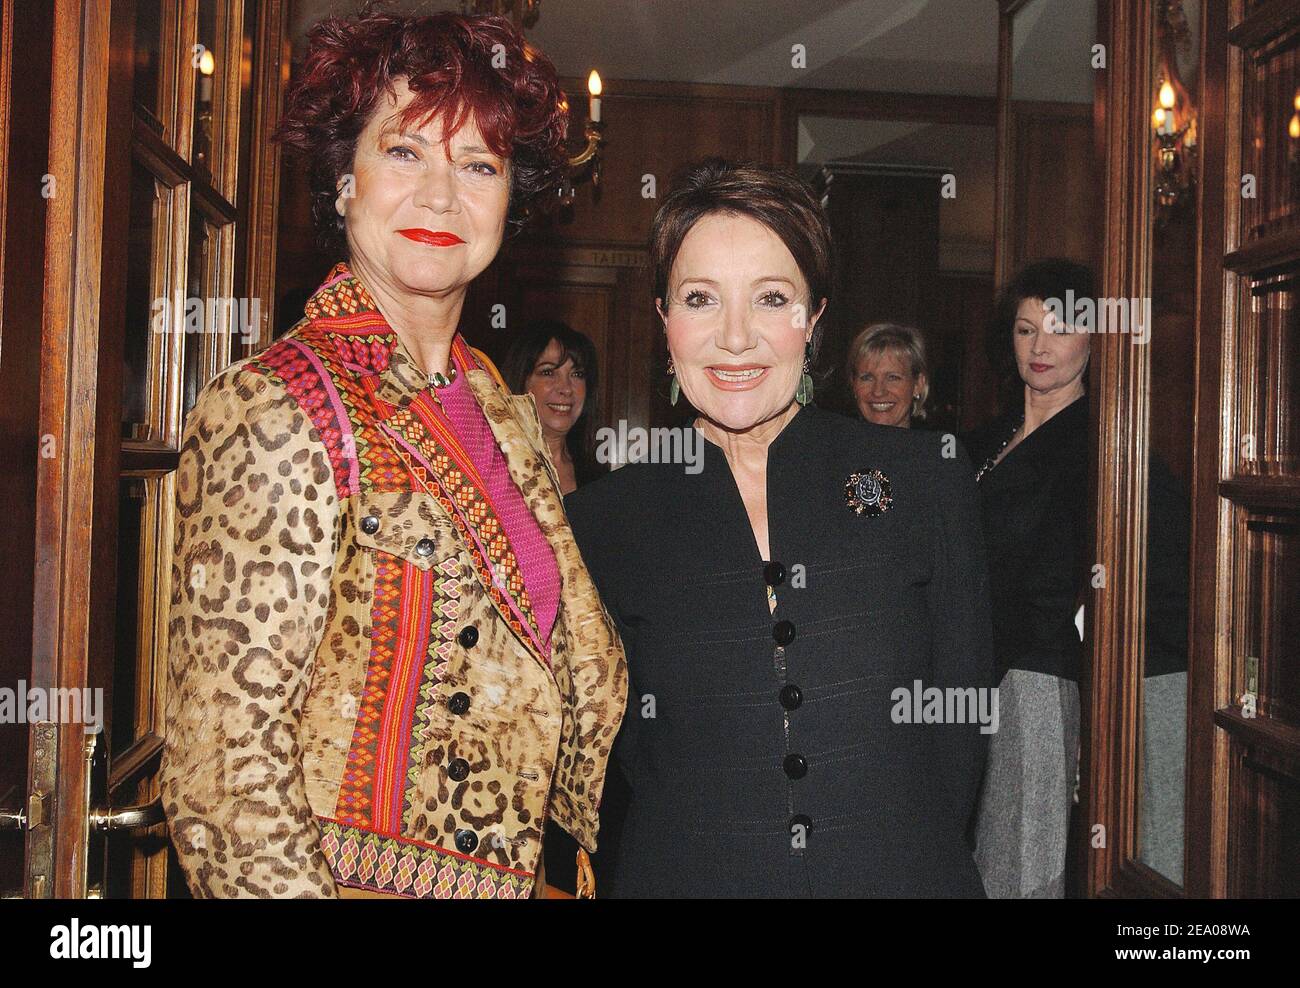 French TV producer Pascale Breugnot (L) and astrologer Yaguel Didier attend the Women's Day Party held at the Hotel de Crillon in Paris, France, on March 7, 2005, on the occasion of the International Women's Day to be observed on March 8. Photo by Giancarlo Gorassini/ABACA. Stock Photo